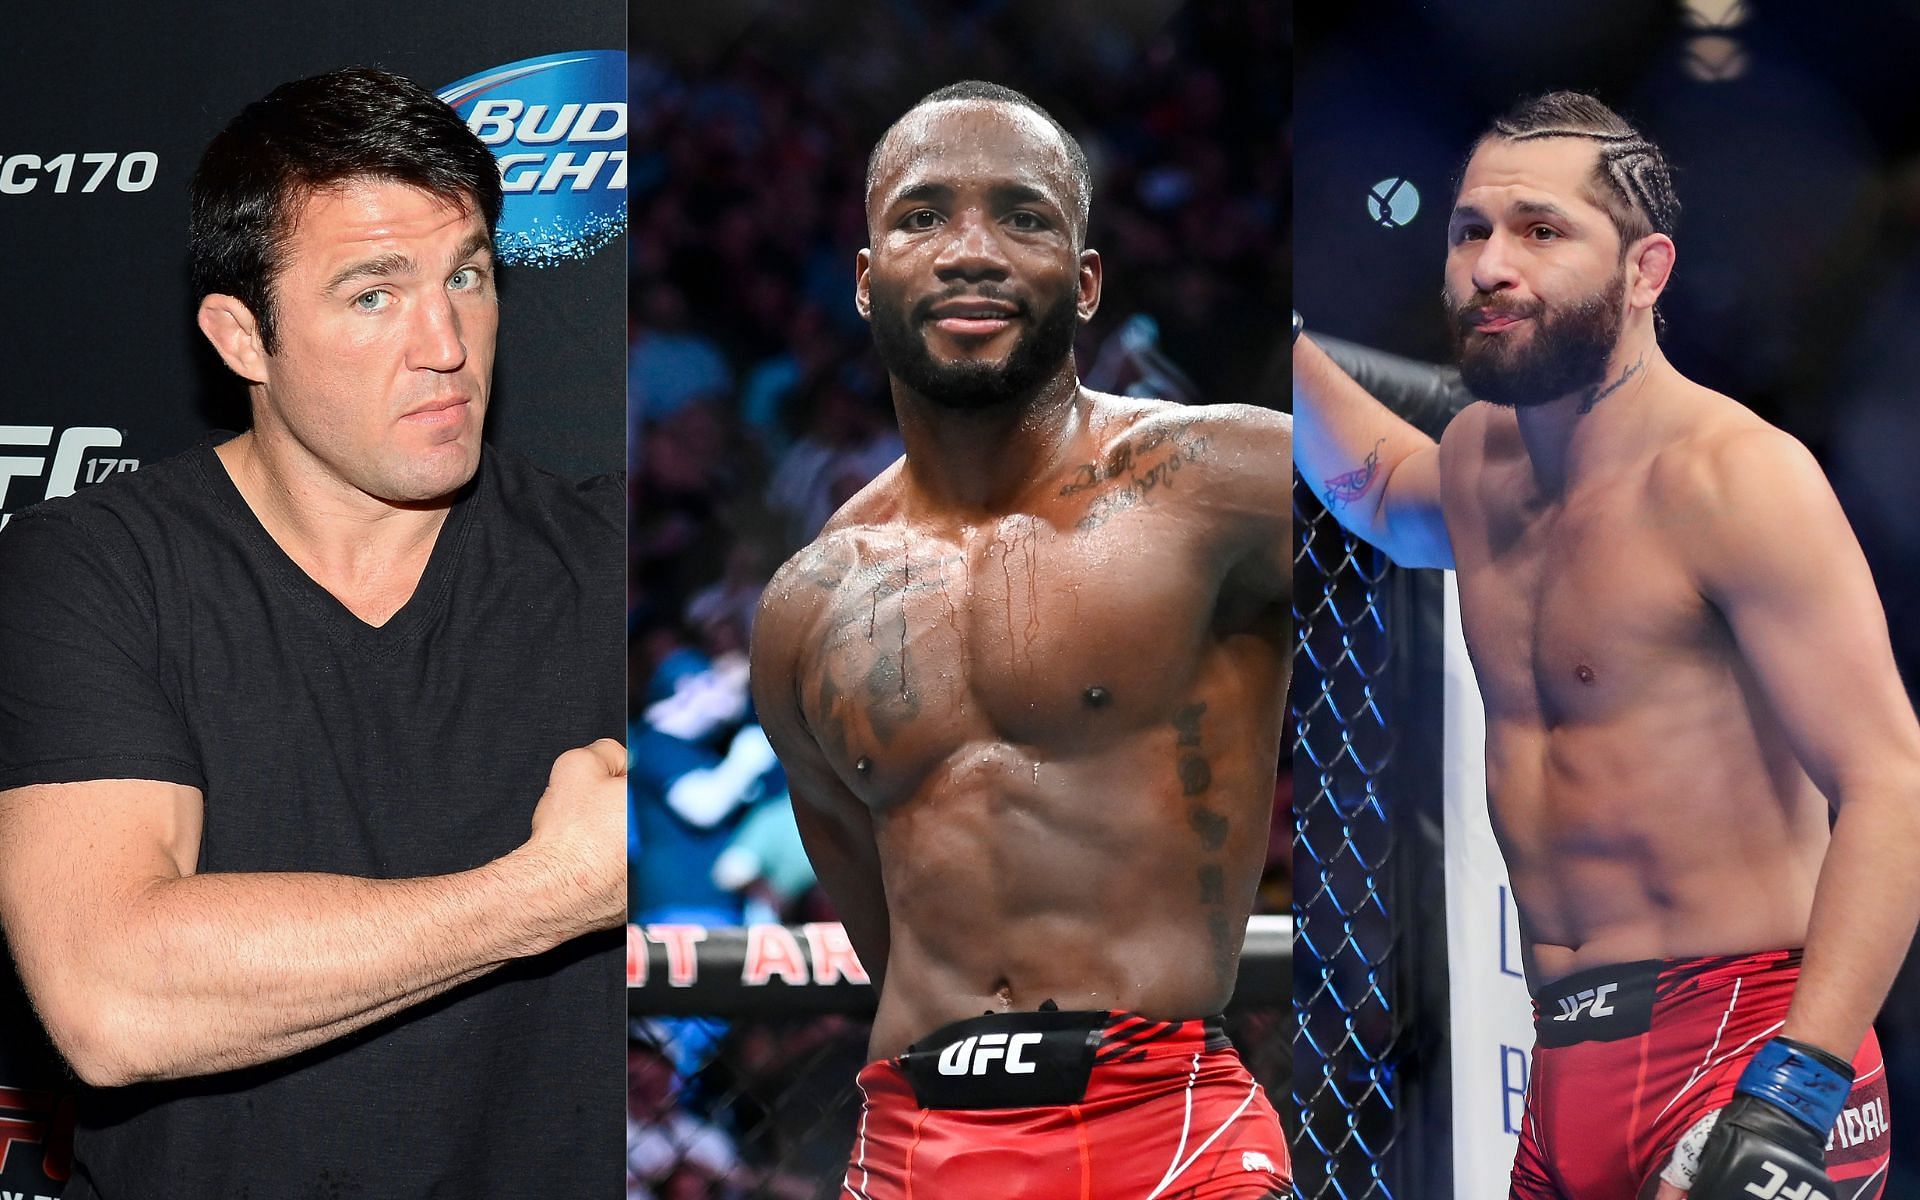 Chael Sonnen (left), Leon Edwards (center) and Jorge Masvidal (right) (Image credits Getty Images)